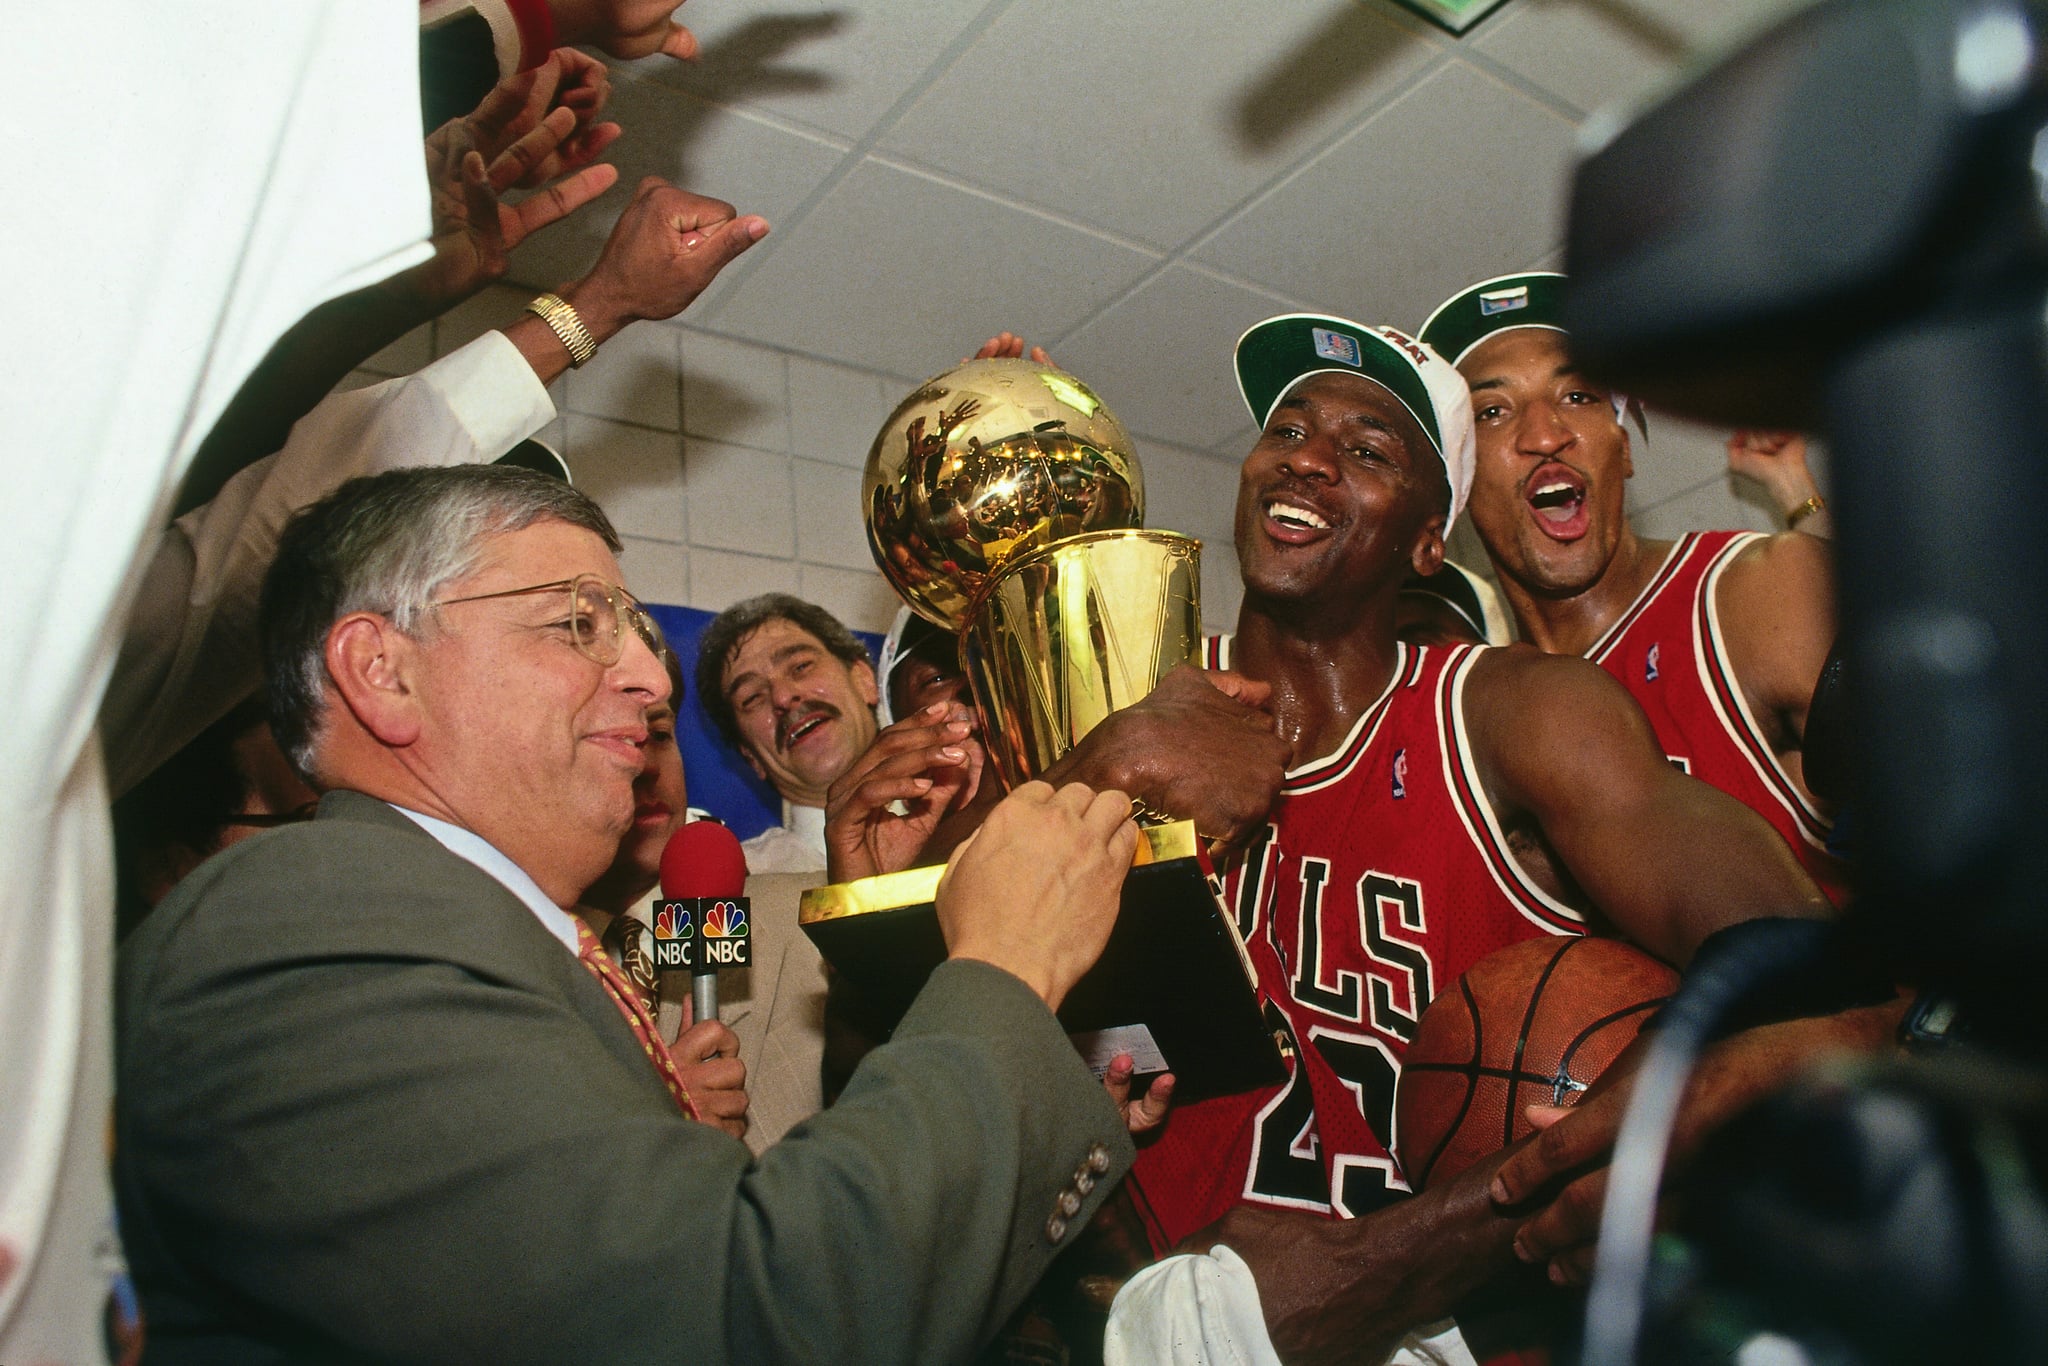 PHOENIX - JUNE 20: NBA Commissioner David Stern presents Michael Jordan and the Chicago Bulls the championship trophy after the Bulls defeated the Phoenix Suns in Game Six of the 1993 NBA Finals on June 20, 1993 at America West Arena in Phoenix, Arizona. NOTE TO USER: User expressly acknowledges and agrees that, by downloading and or using this photograph, User is consenting to the terms and conditions of the Getty Images License Agreement. Mandatory Copyright Notice: Copyright 1993 NBAE (Photo by Andrew D. Bernstein/NBAE via Getty Images)